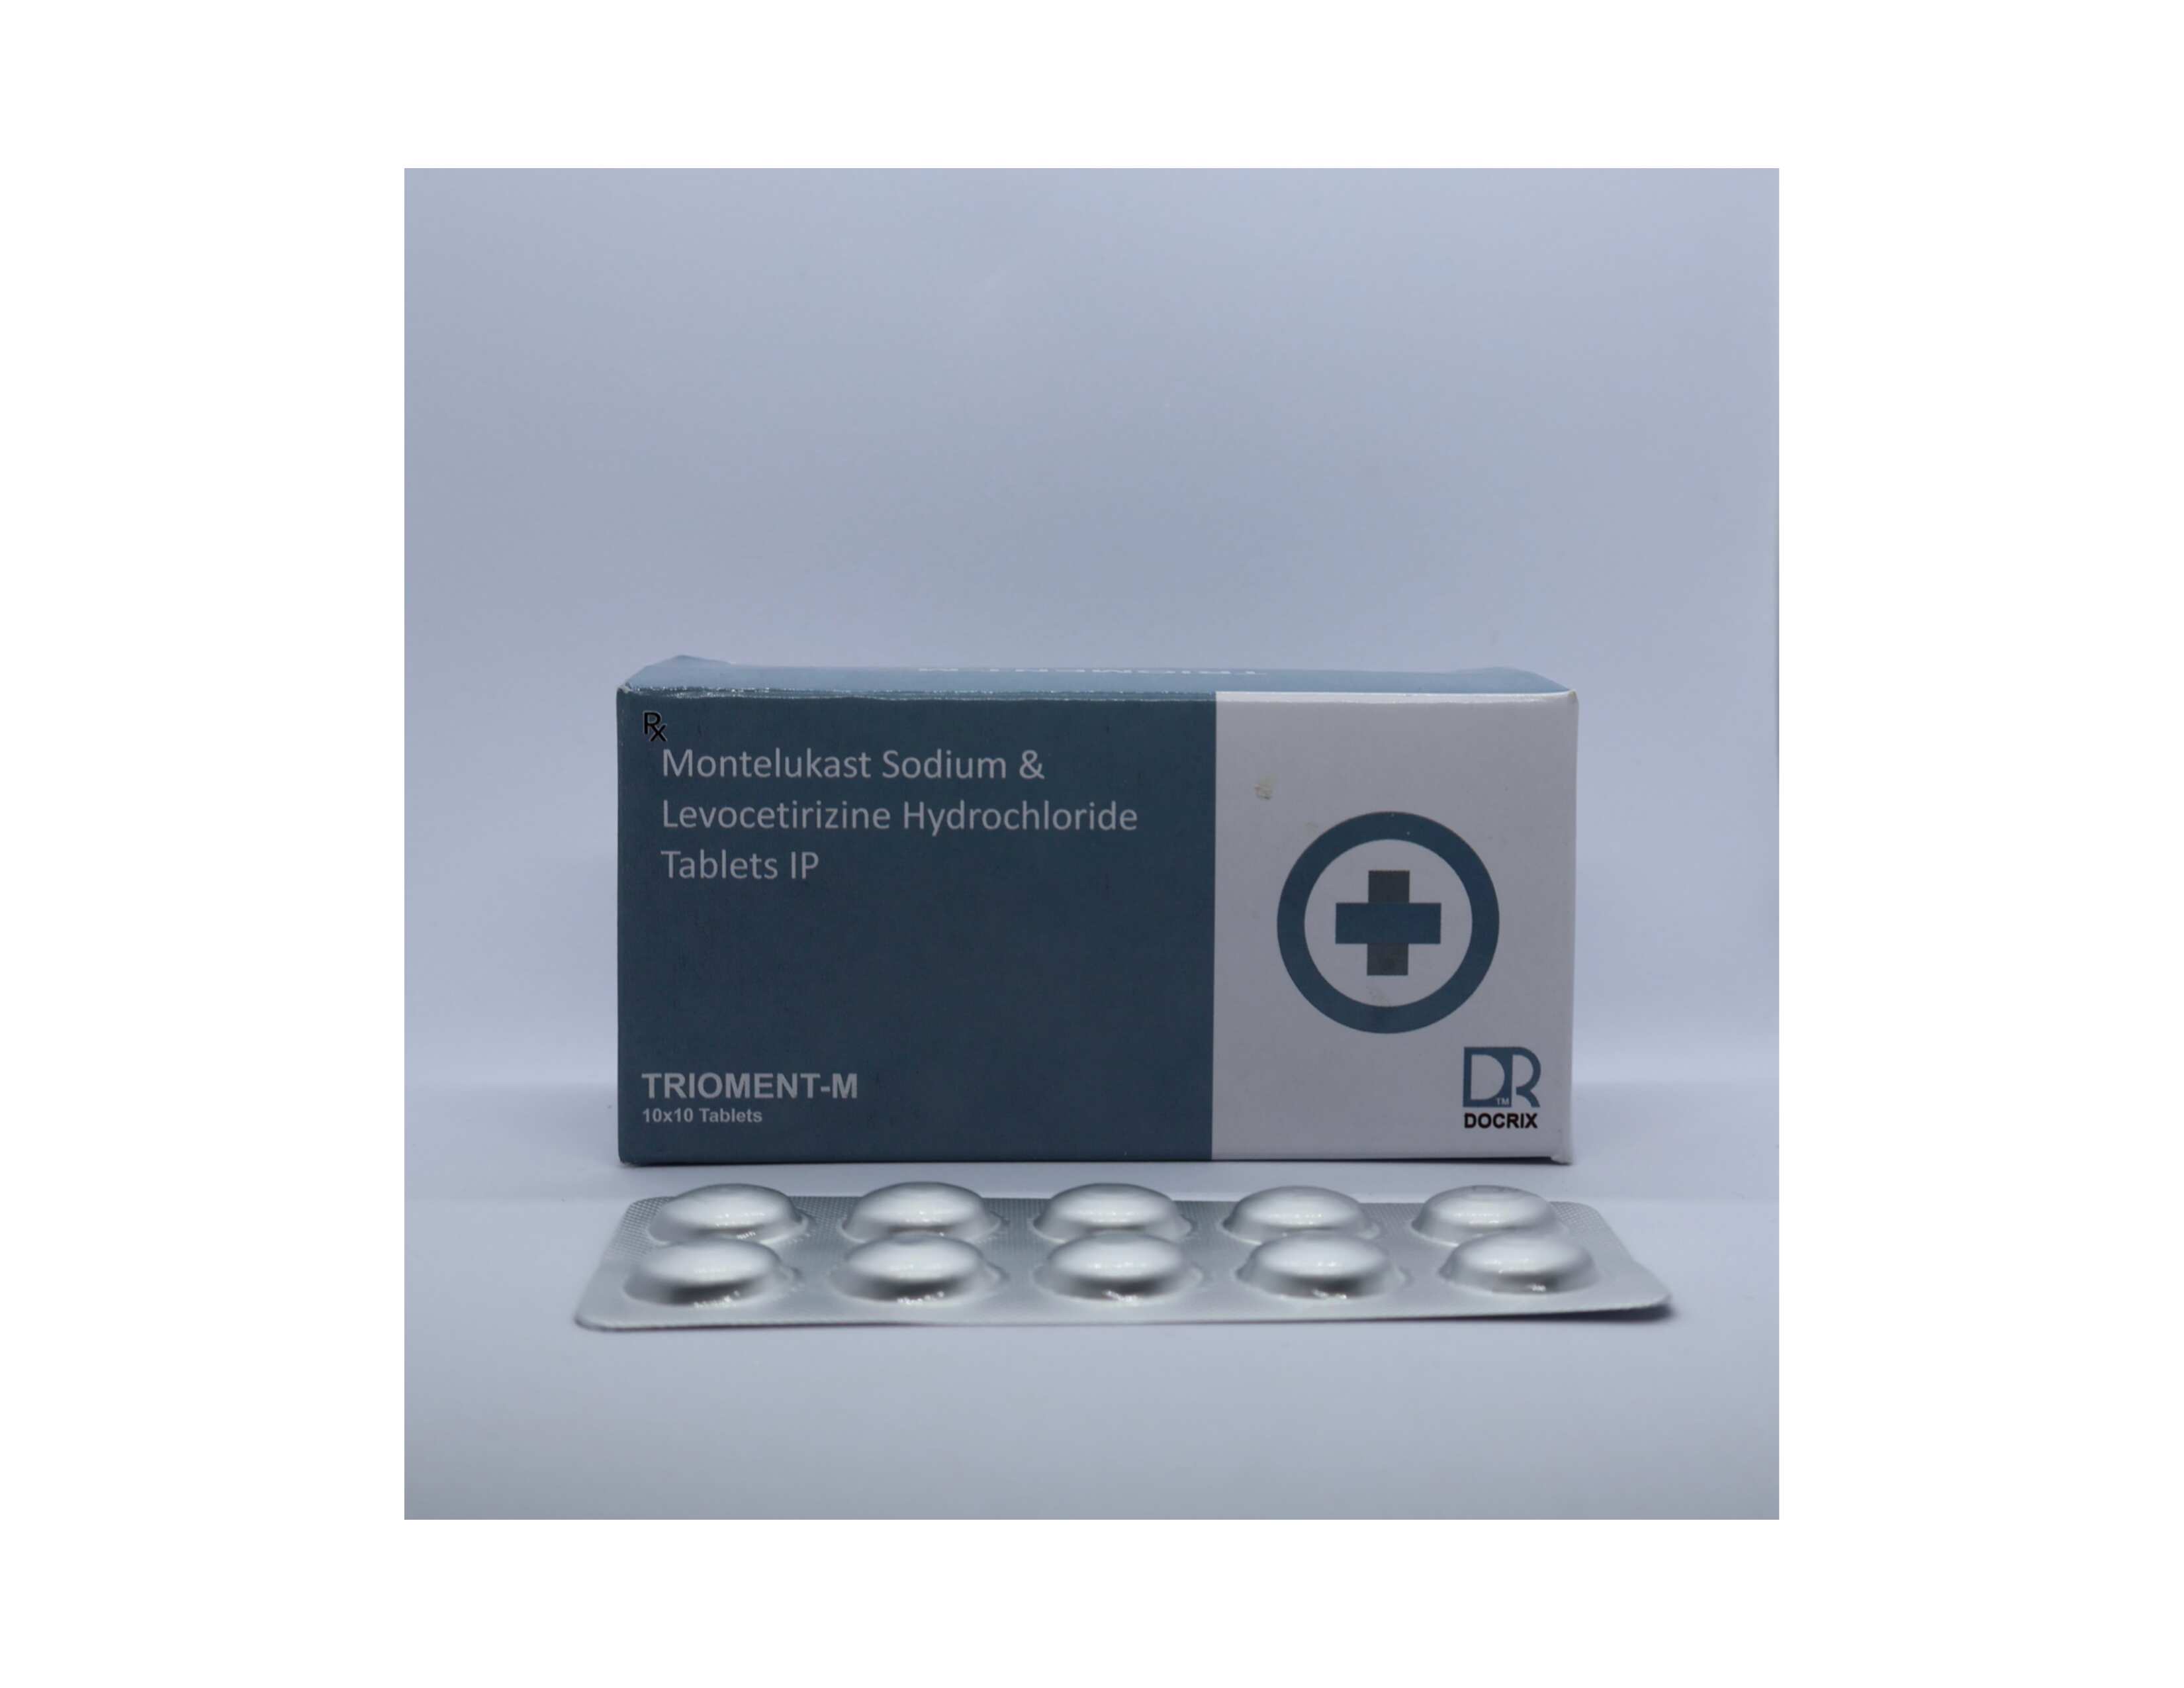 Product Name: Trioment M, Compositions of Trioment M are Montelukast Sodium & Levocetirizine Hydrochloride Tablets IP - Docrix Healthcare